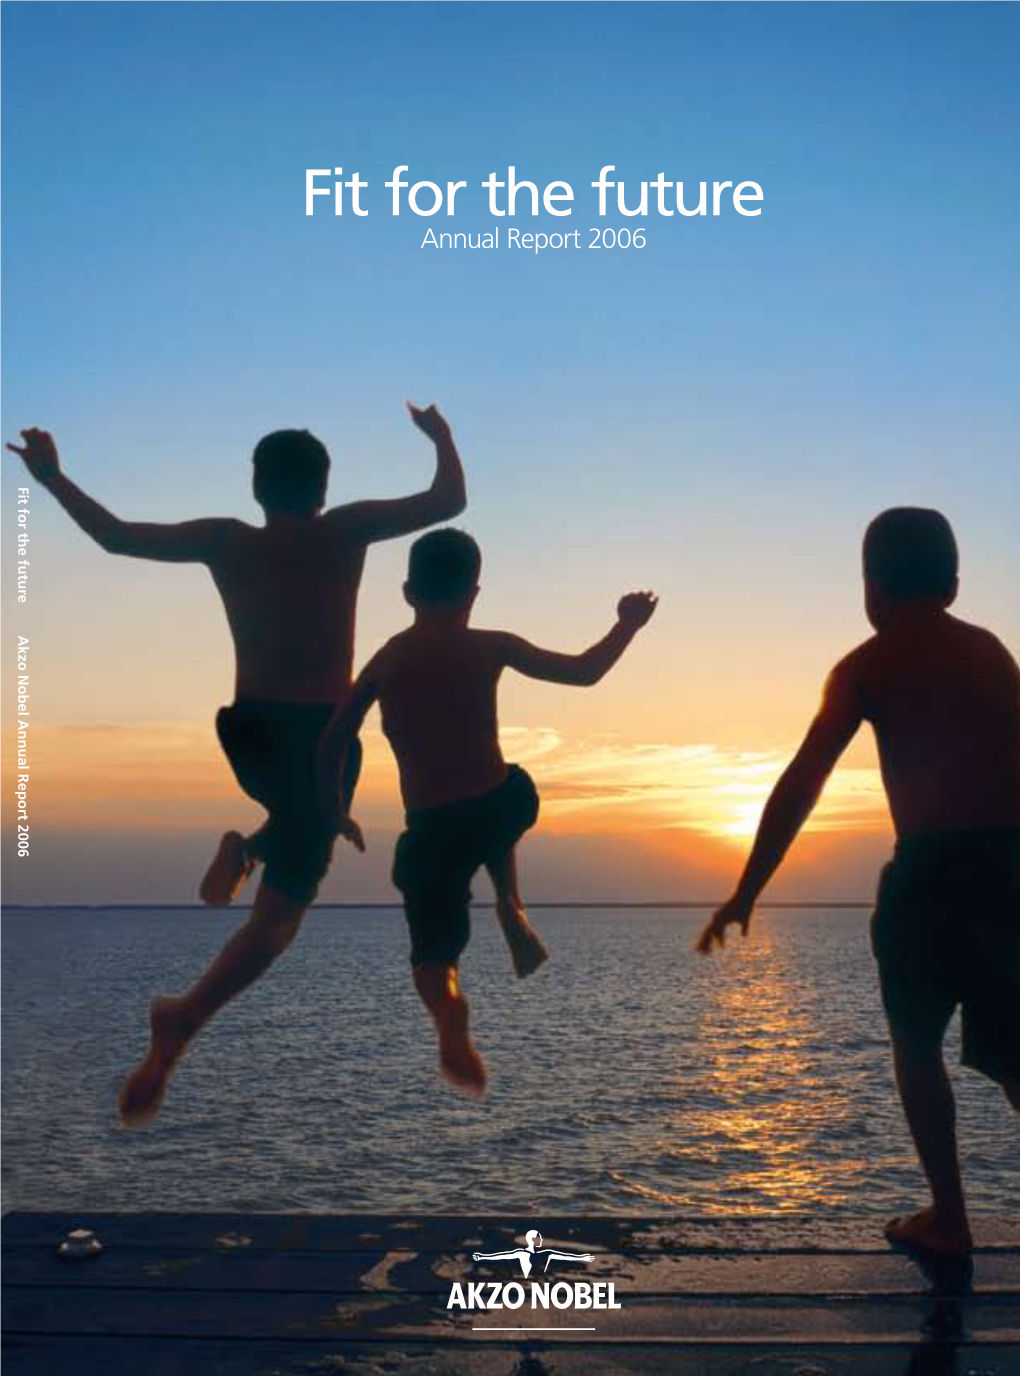 Fit for the Future Annual Report 2006 Fit for the Future Akzo Nobel Annual Report 2006